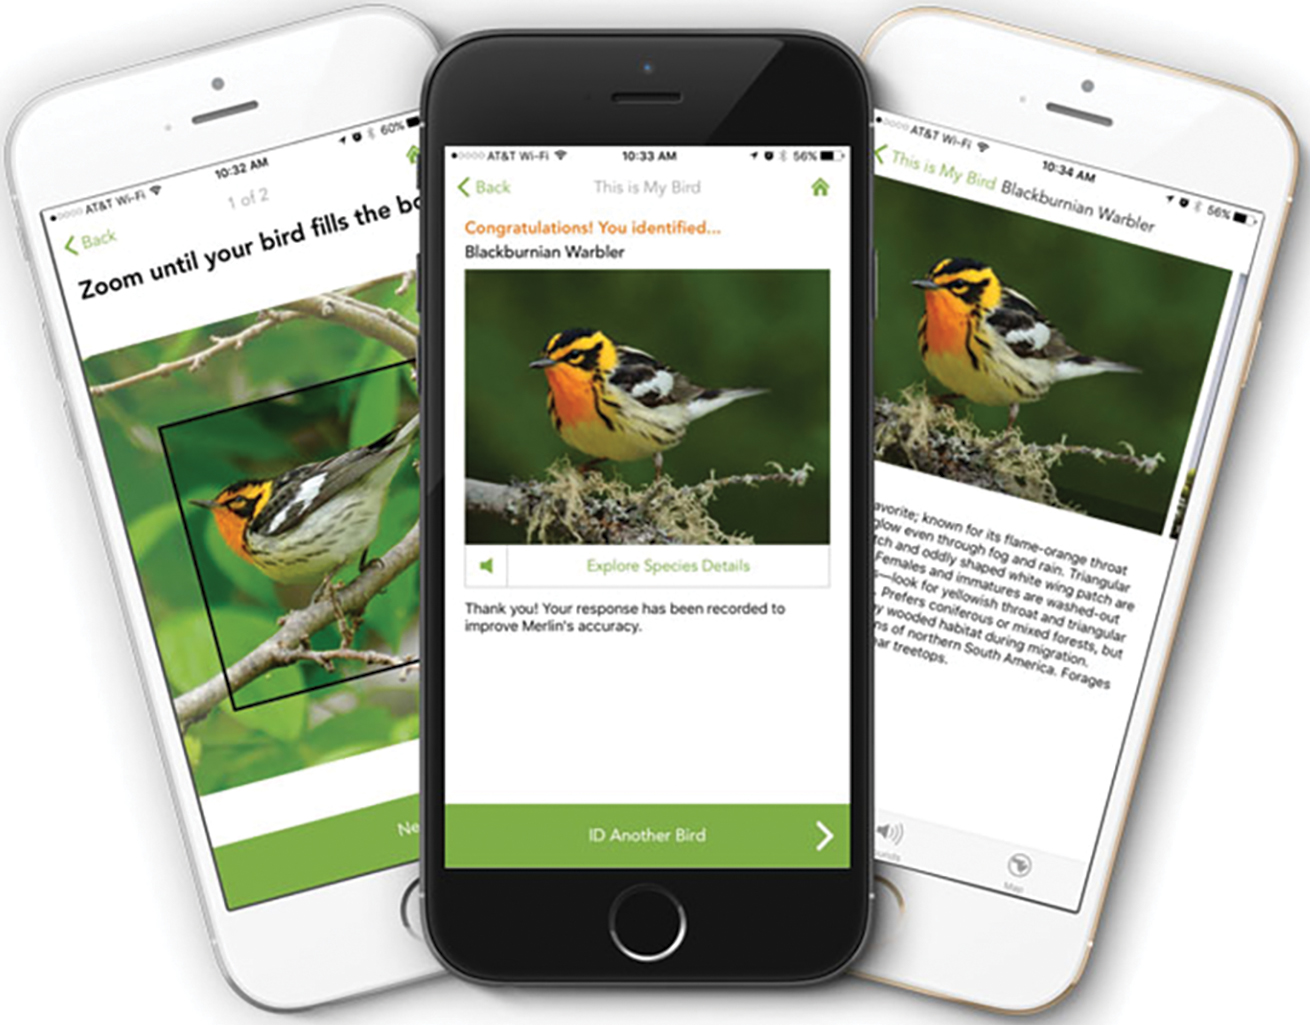 The Cornell Lab of Ornithology provides free mobile apps to help eBird participants submit bird observations anywhere, anytime. The free Merlin ID app is also available to help students with bird identification.